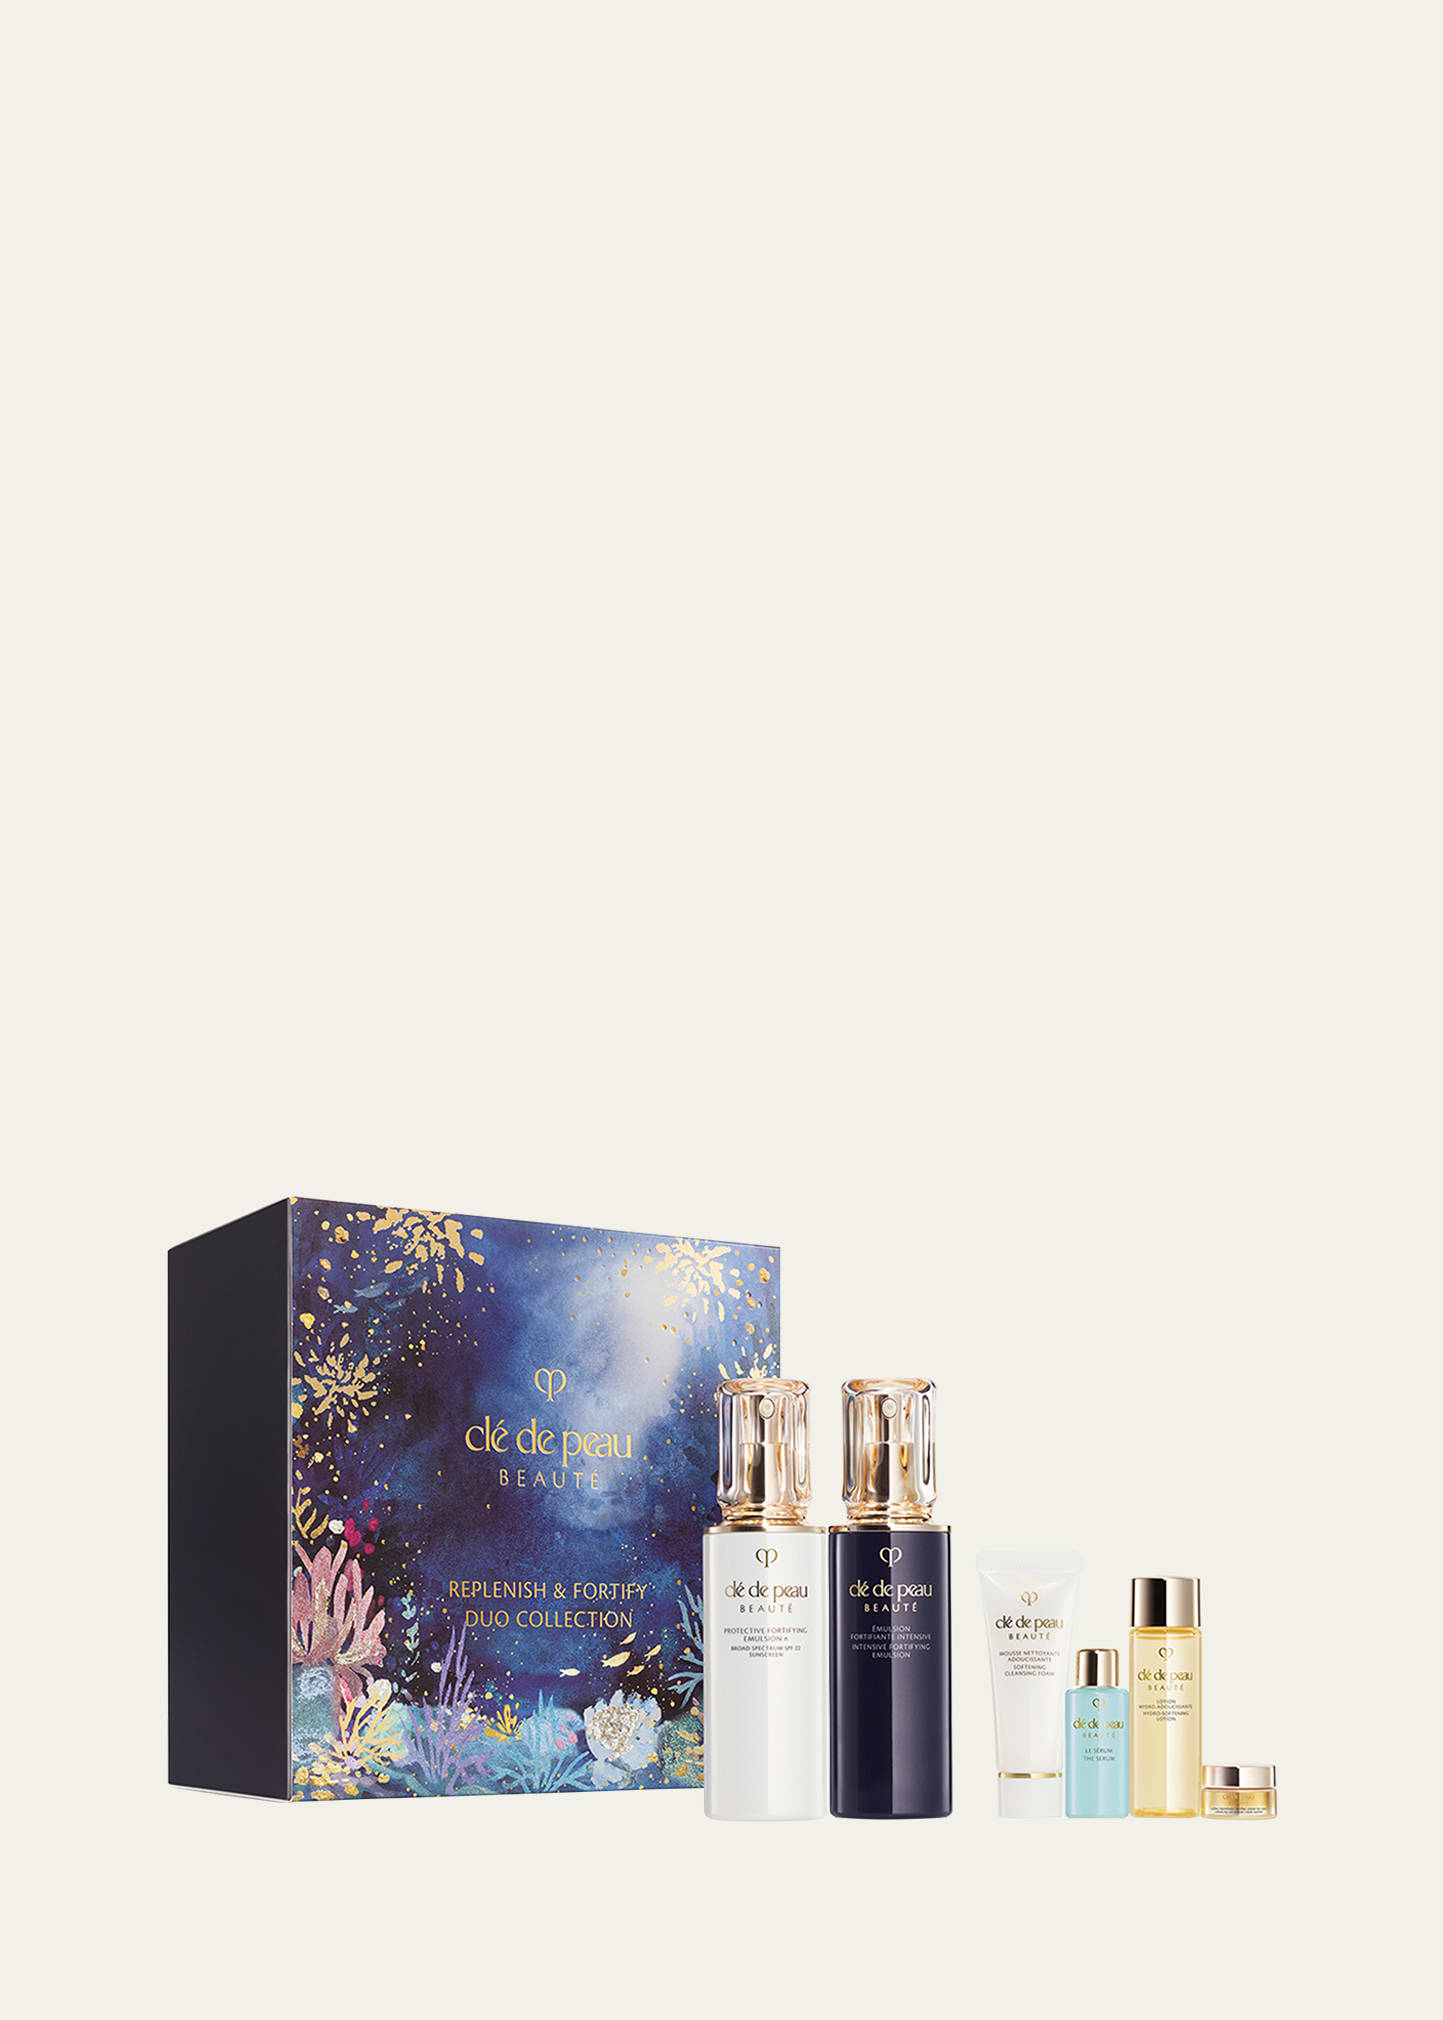 Limited Edition Replenish & Fortify Duo Collection ($474 Value)